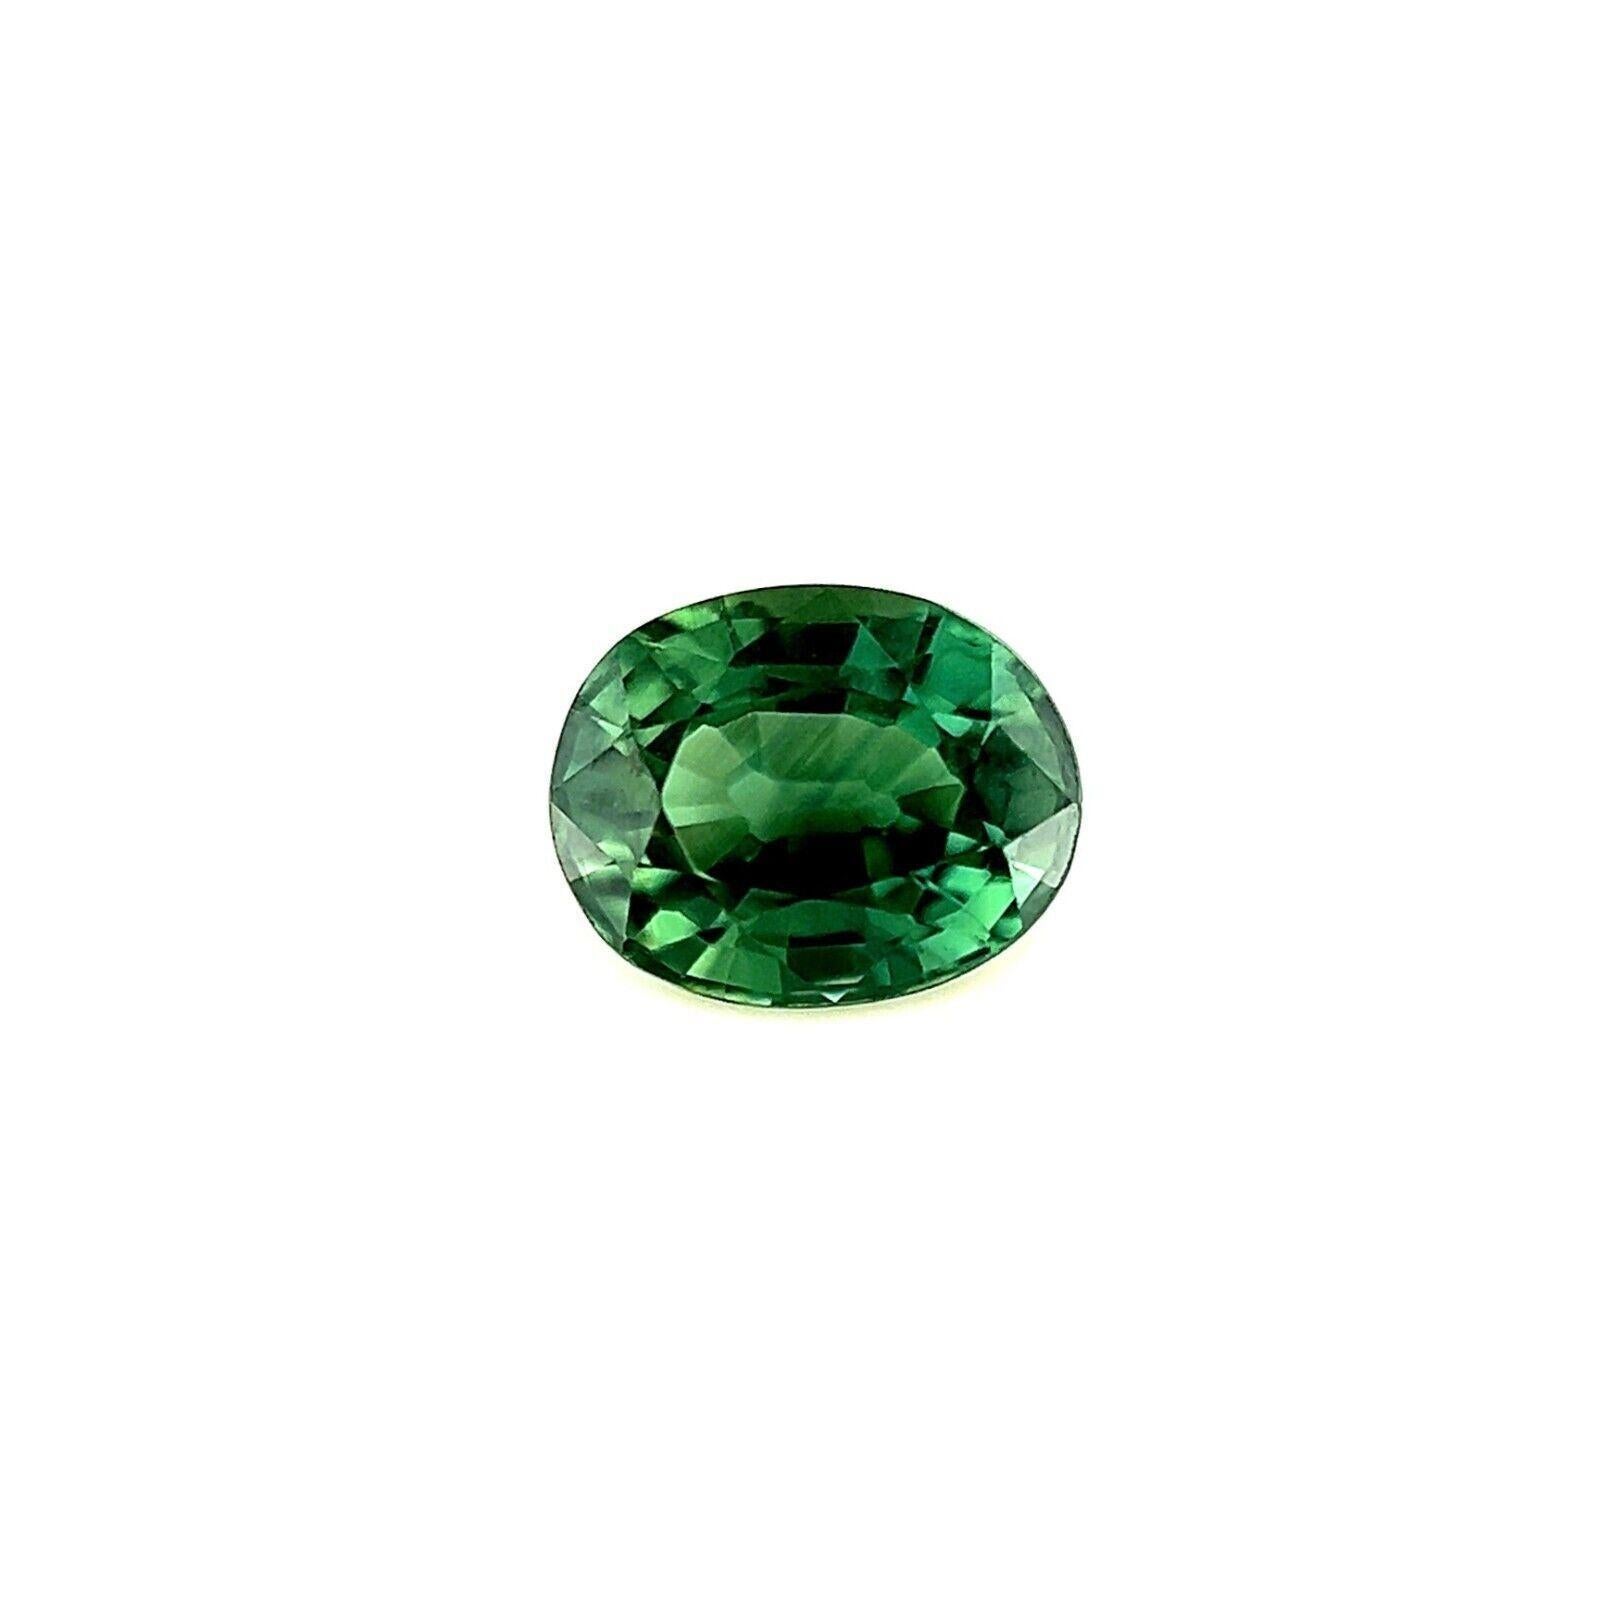 0.54ct Natural Blue Green Australian Sapphire Oval Cut Rare Gemstone 5x4mm VS

Natural Australian Green Blue Teal Sapphire Gemstone.
0.53 Carat with a beautiful and unique green blue teal colour and excellent clarity, a very clean stone.  Also has